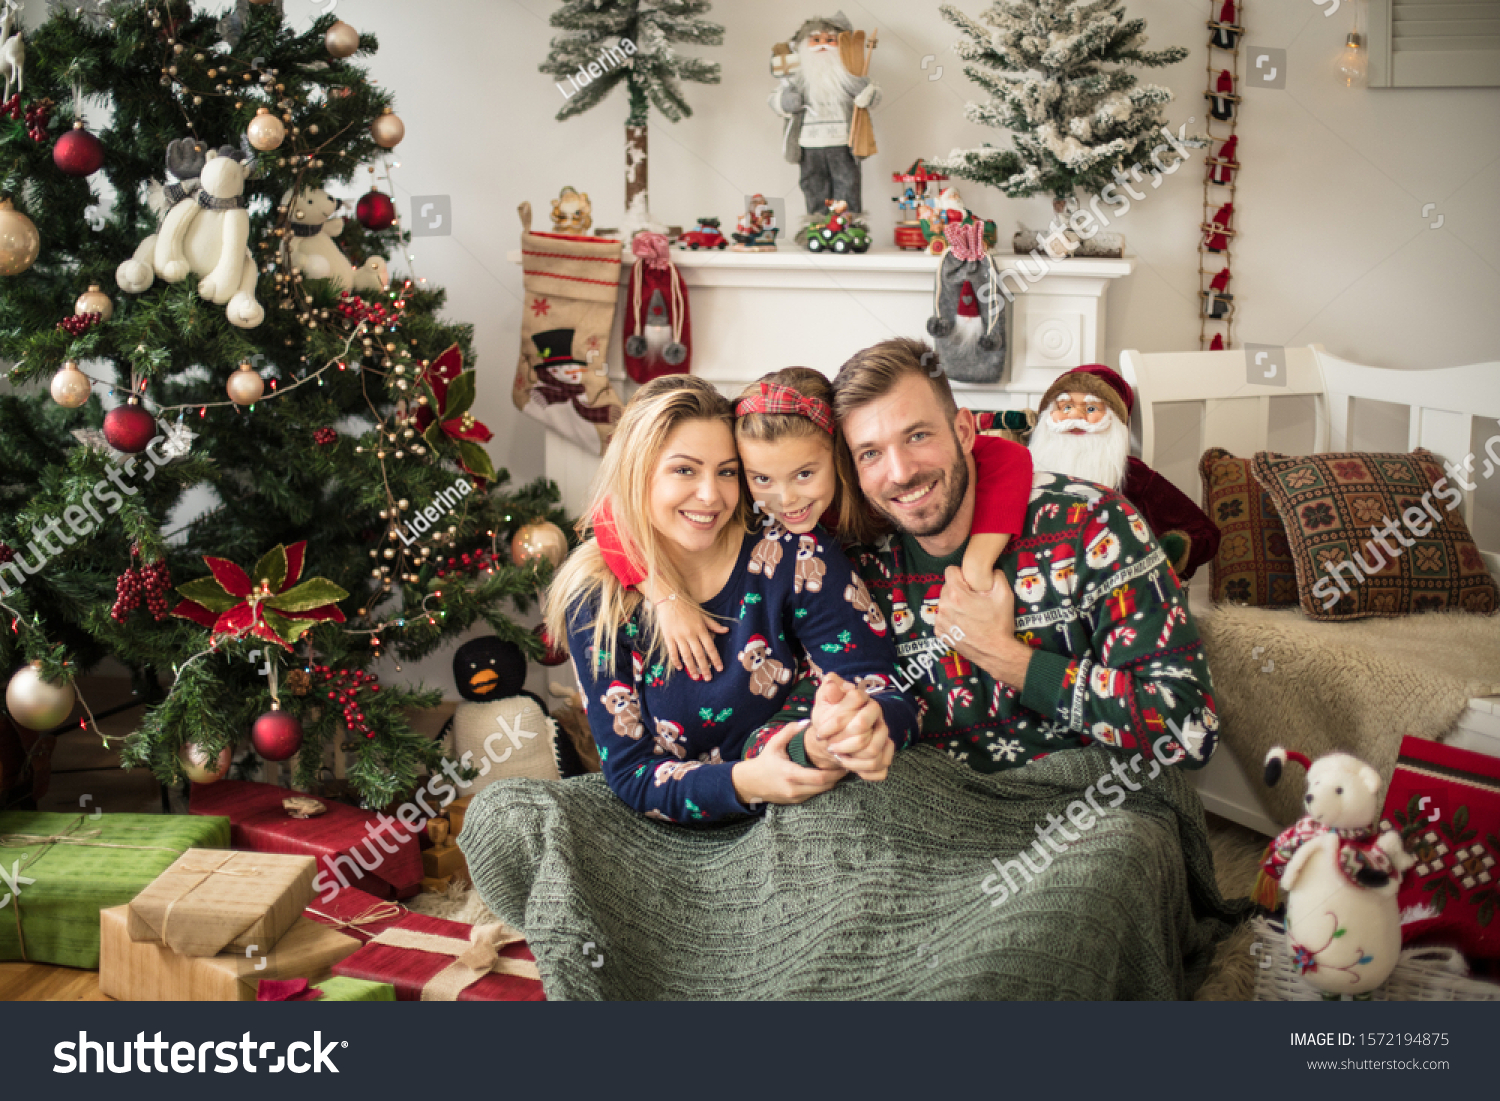 Christmas has always been a time for family for them. Parents with daughter at home. #1572194875